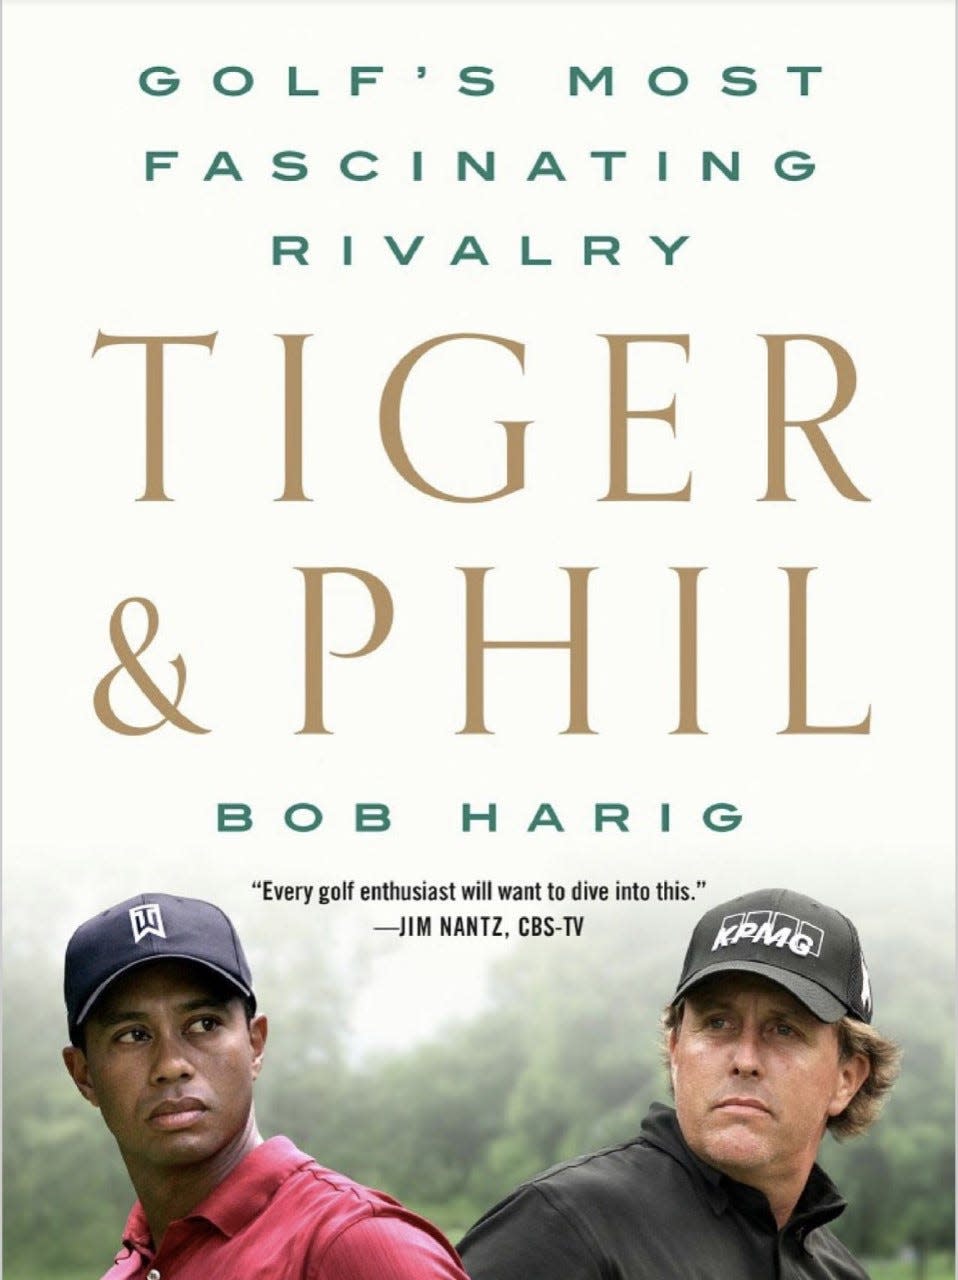 Longtime golf writer Bob Harig's book, “Tiger & Phil: Golf’s Most Fascinating Rivalry”